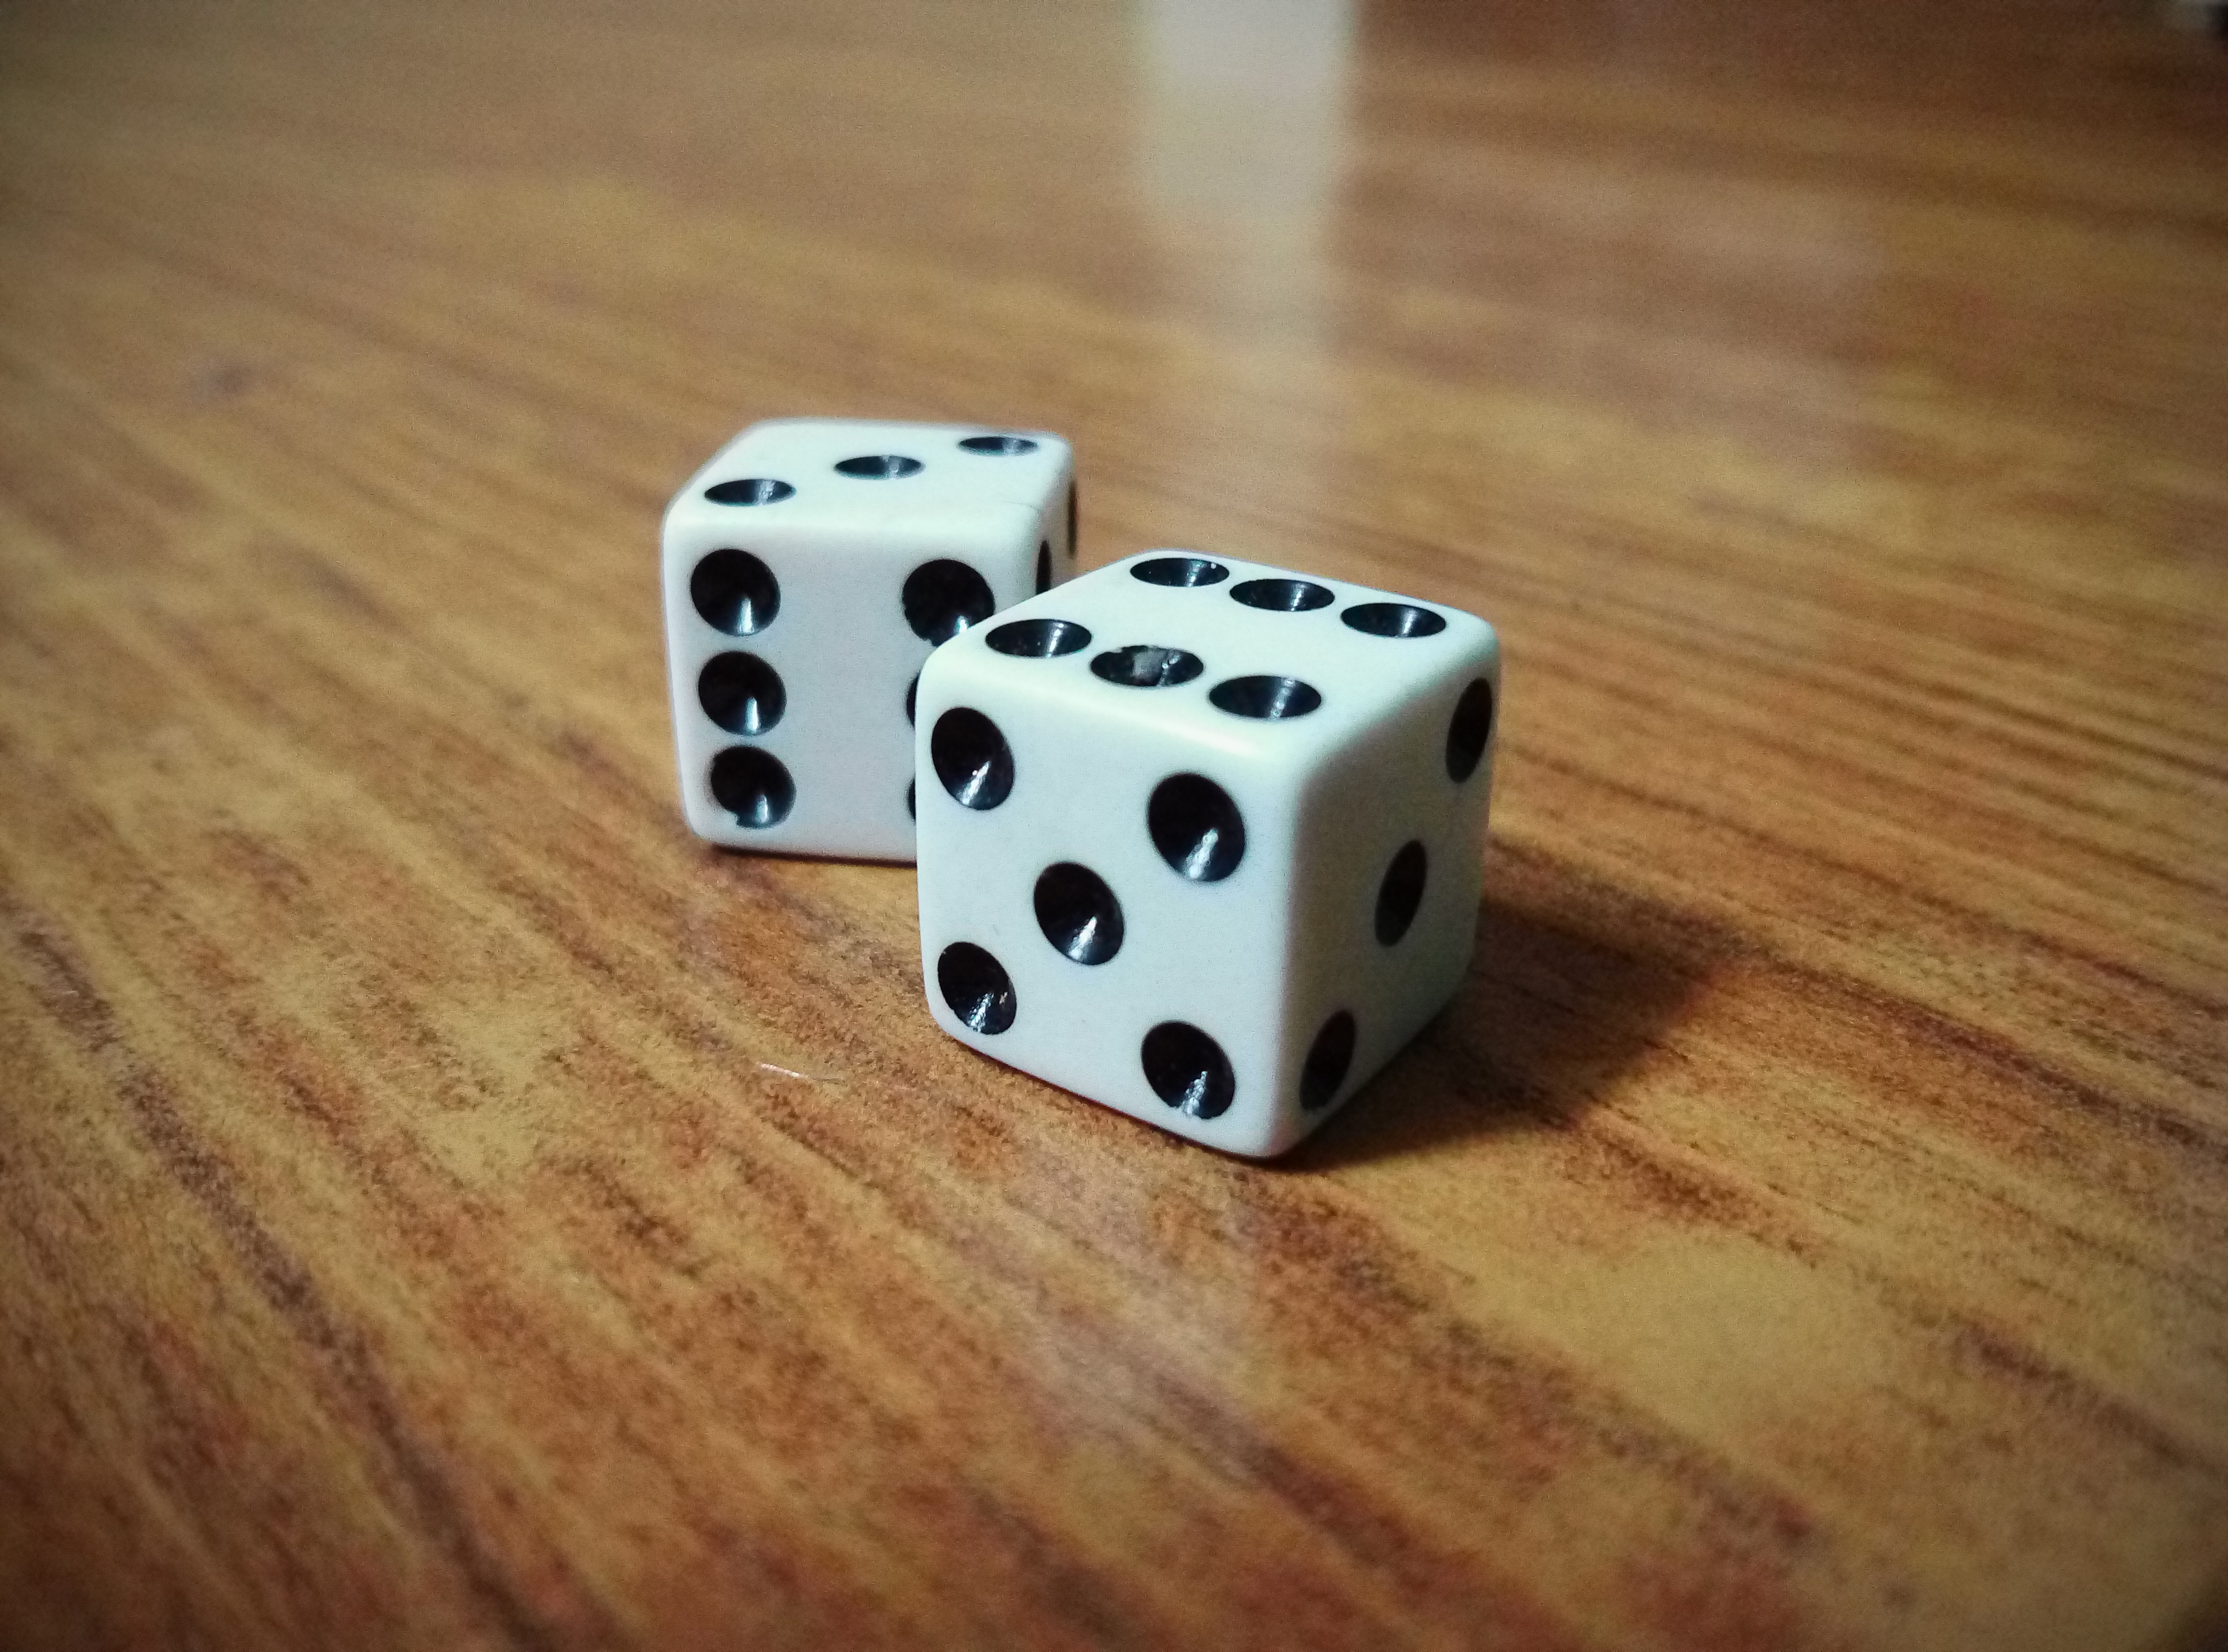 A pair of dice on wood table